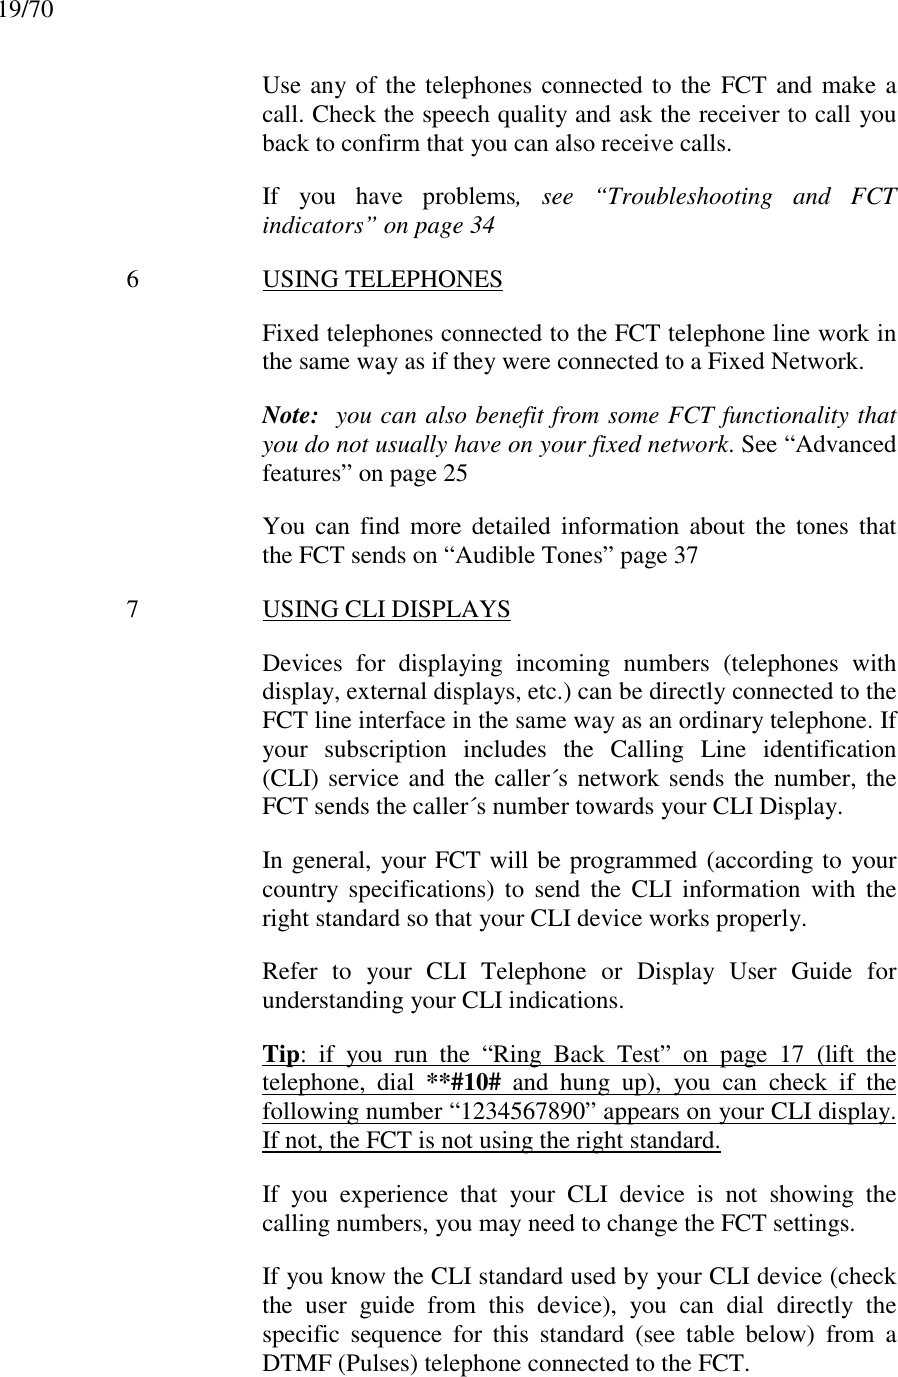 19/70Use any of the telephones connected to the FCT and make acall. Check the speech quality and ask the receiver to call youback to confirm that you can also receive calls.If you have problems, see “Troubleshooting and FCTindicators” on page 346 USING TELEPHONESFixed telephones connected to the FCT telephone line work inthe same way as if they were connected to a Fixed Network.Note:  you can also benefit from some FCT functionality thatyou do not usually have on your fixed network. See “Advancedfeatures” on page 25You can find more detailed information about the tones thatthe FCT sends on “Audible Tones” page 377 USING CLI DISPLAYSDevices for displaying incoming numbers (telephones withdisplay, external displays, etc.) can be directly connected to theFCT line interface in the same way as an ordinary telephone. Ifyour subscription includes the Calling Line identification(CLI) service and the caller´s network sends the number, theFCT sends the caller´s number towards your CLI Display.In general, your FCT will be programmed (according to yourcountry specifications) to send the CLI information with theright standard so that your CLI device works properly.Refer to your CLI Telephone or Display User Guide forunderstanding your CLI indications.Tip: if you run the “Ring Back Test” on page 17 (lift thetelephone, dial **#10# and hung up), you can check if thefollowing number “1234567890” appears on your CLI display.If not, the FCT is not using the right standard.If you experience that your CLI device is not showing thecalling numbers, you may need to change the FCT settings.If you know the CLI standard used by your CLI device (checkthe user guide from this device), you can dial directly thespecific sequence for this standard (see table below) from aDTMF (Pulses) telephone connected to the FCT.